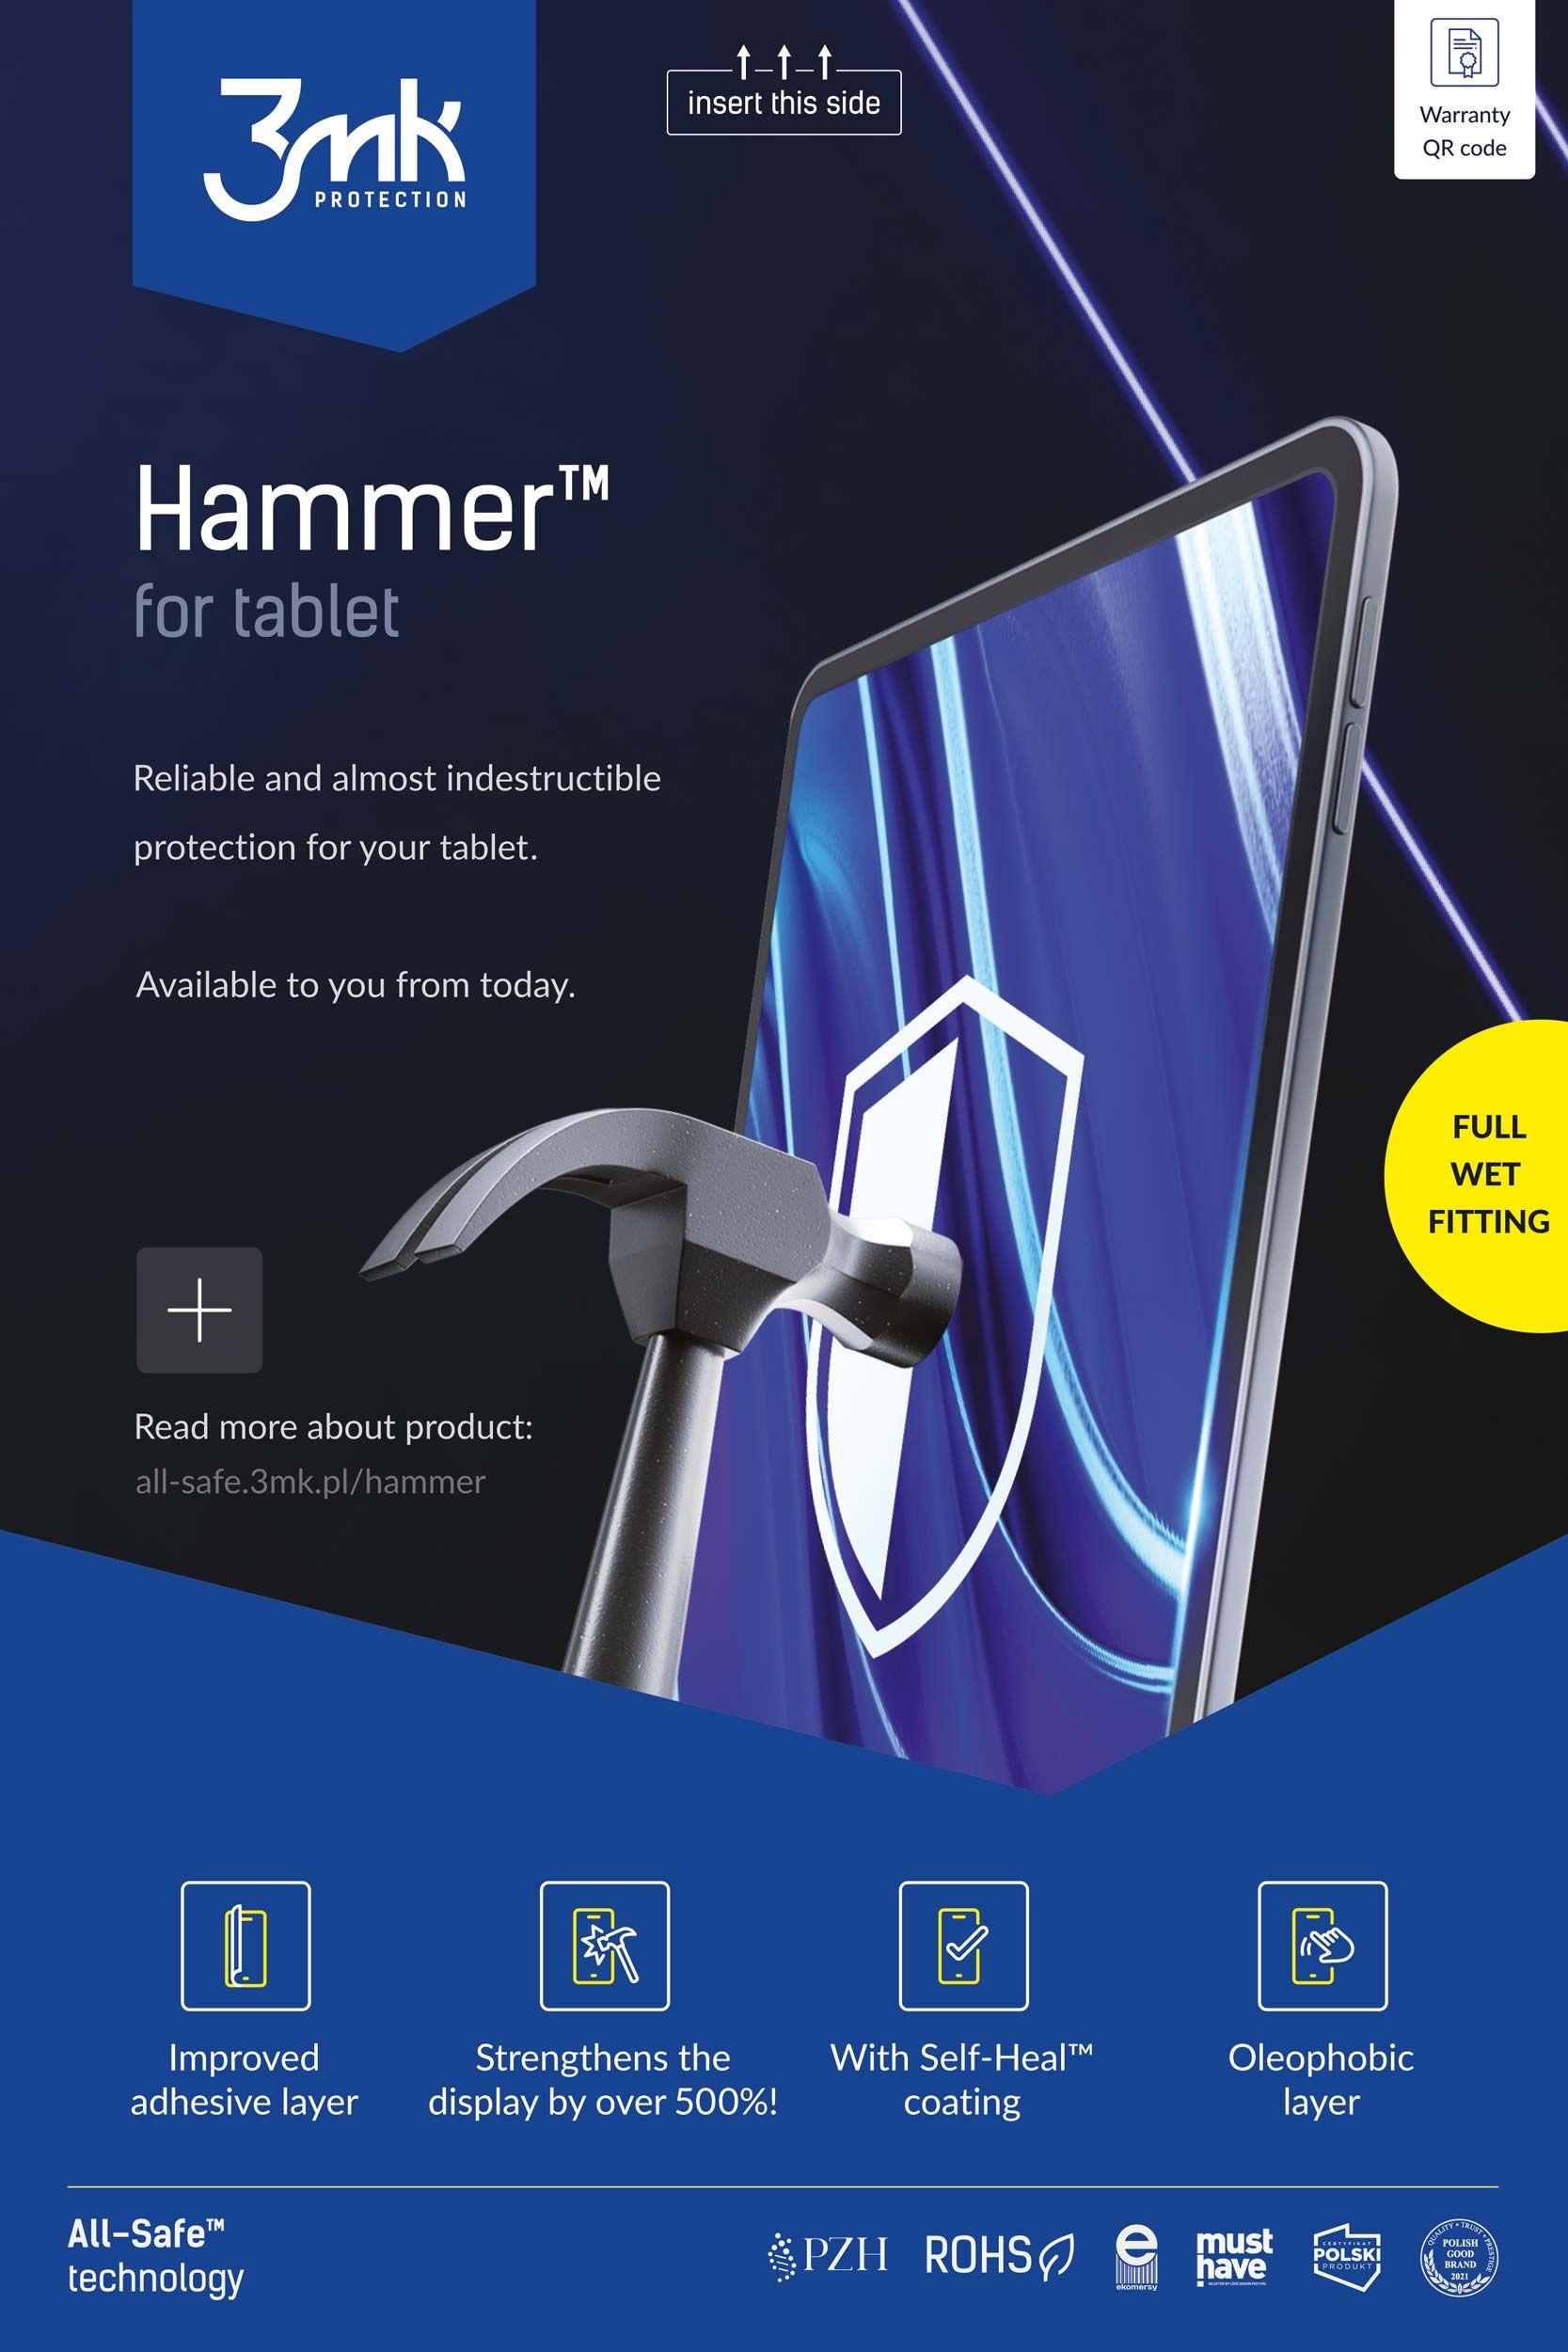 Protective films 3mk All-Safe - AIO Hammer Tablet Full Wet Fittting 5 pcs (only compatible with the new plotter)